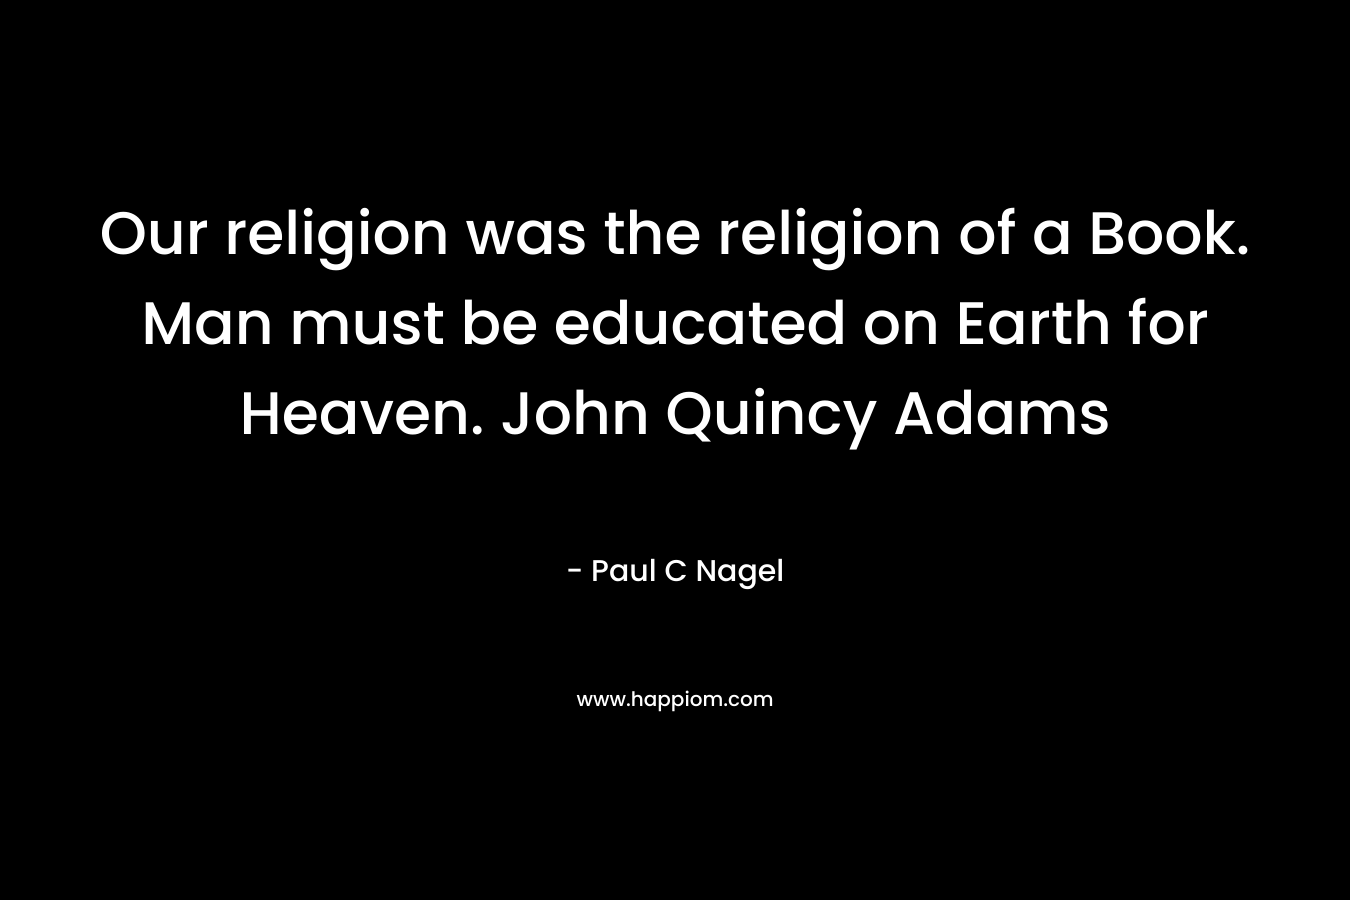 Our religion was the religion of a Book. Man must be educated on Earth for Heaven. John Quincy Adams – Paul C Nagel